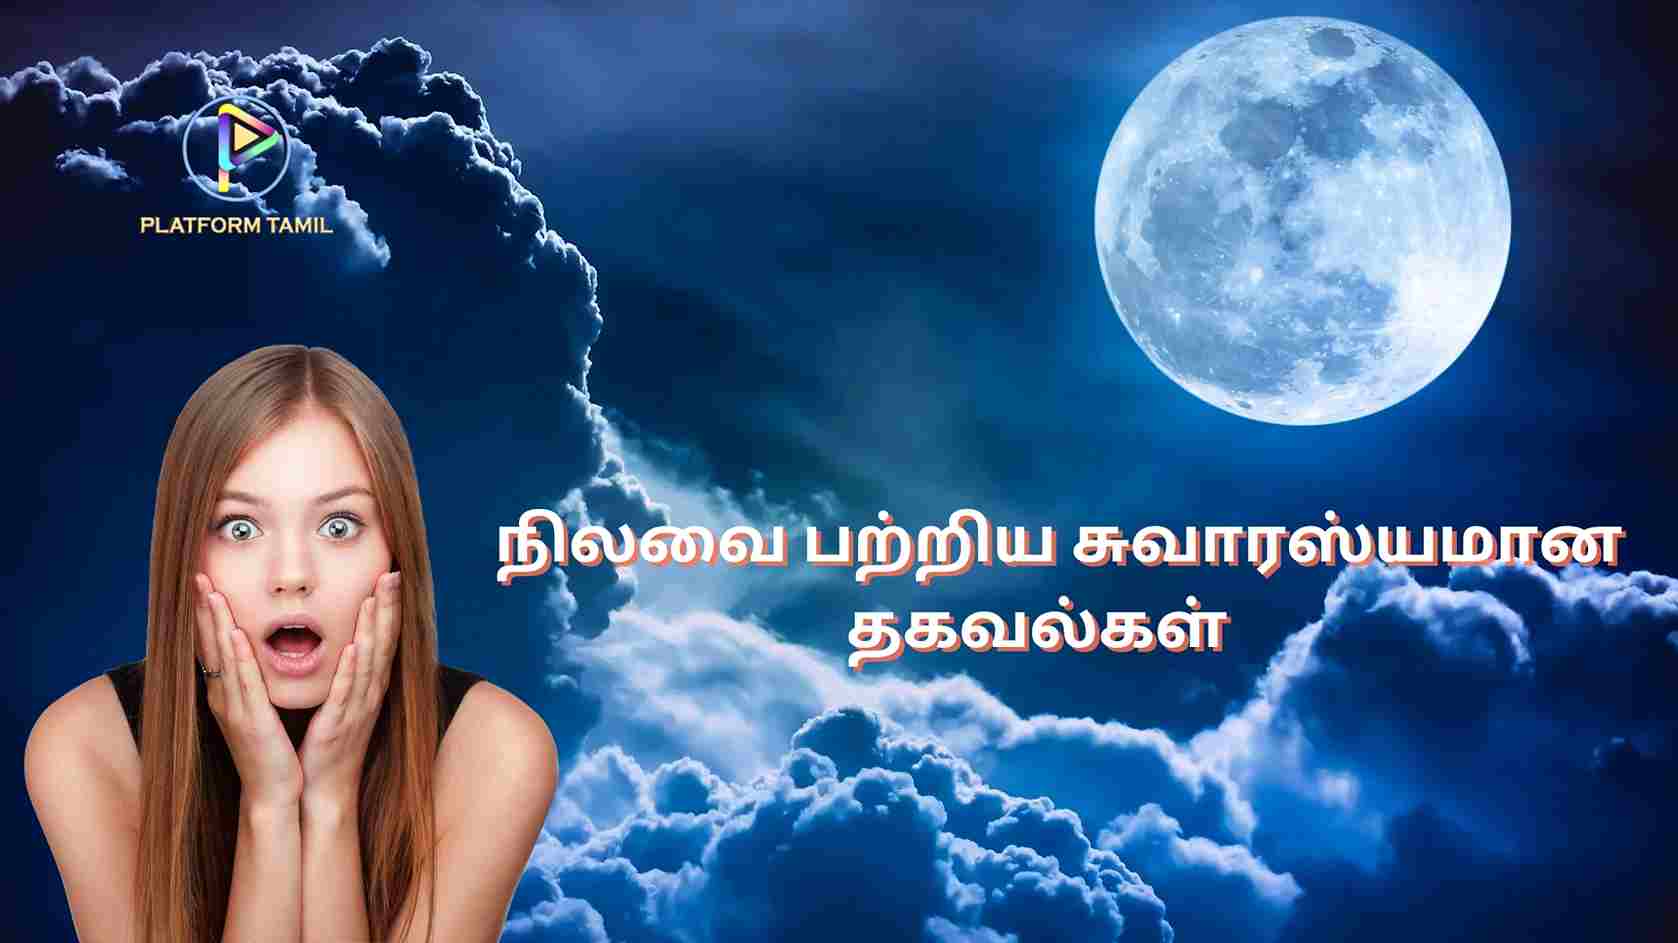 Interesting Facts About Moon - Platform Tamil